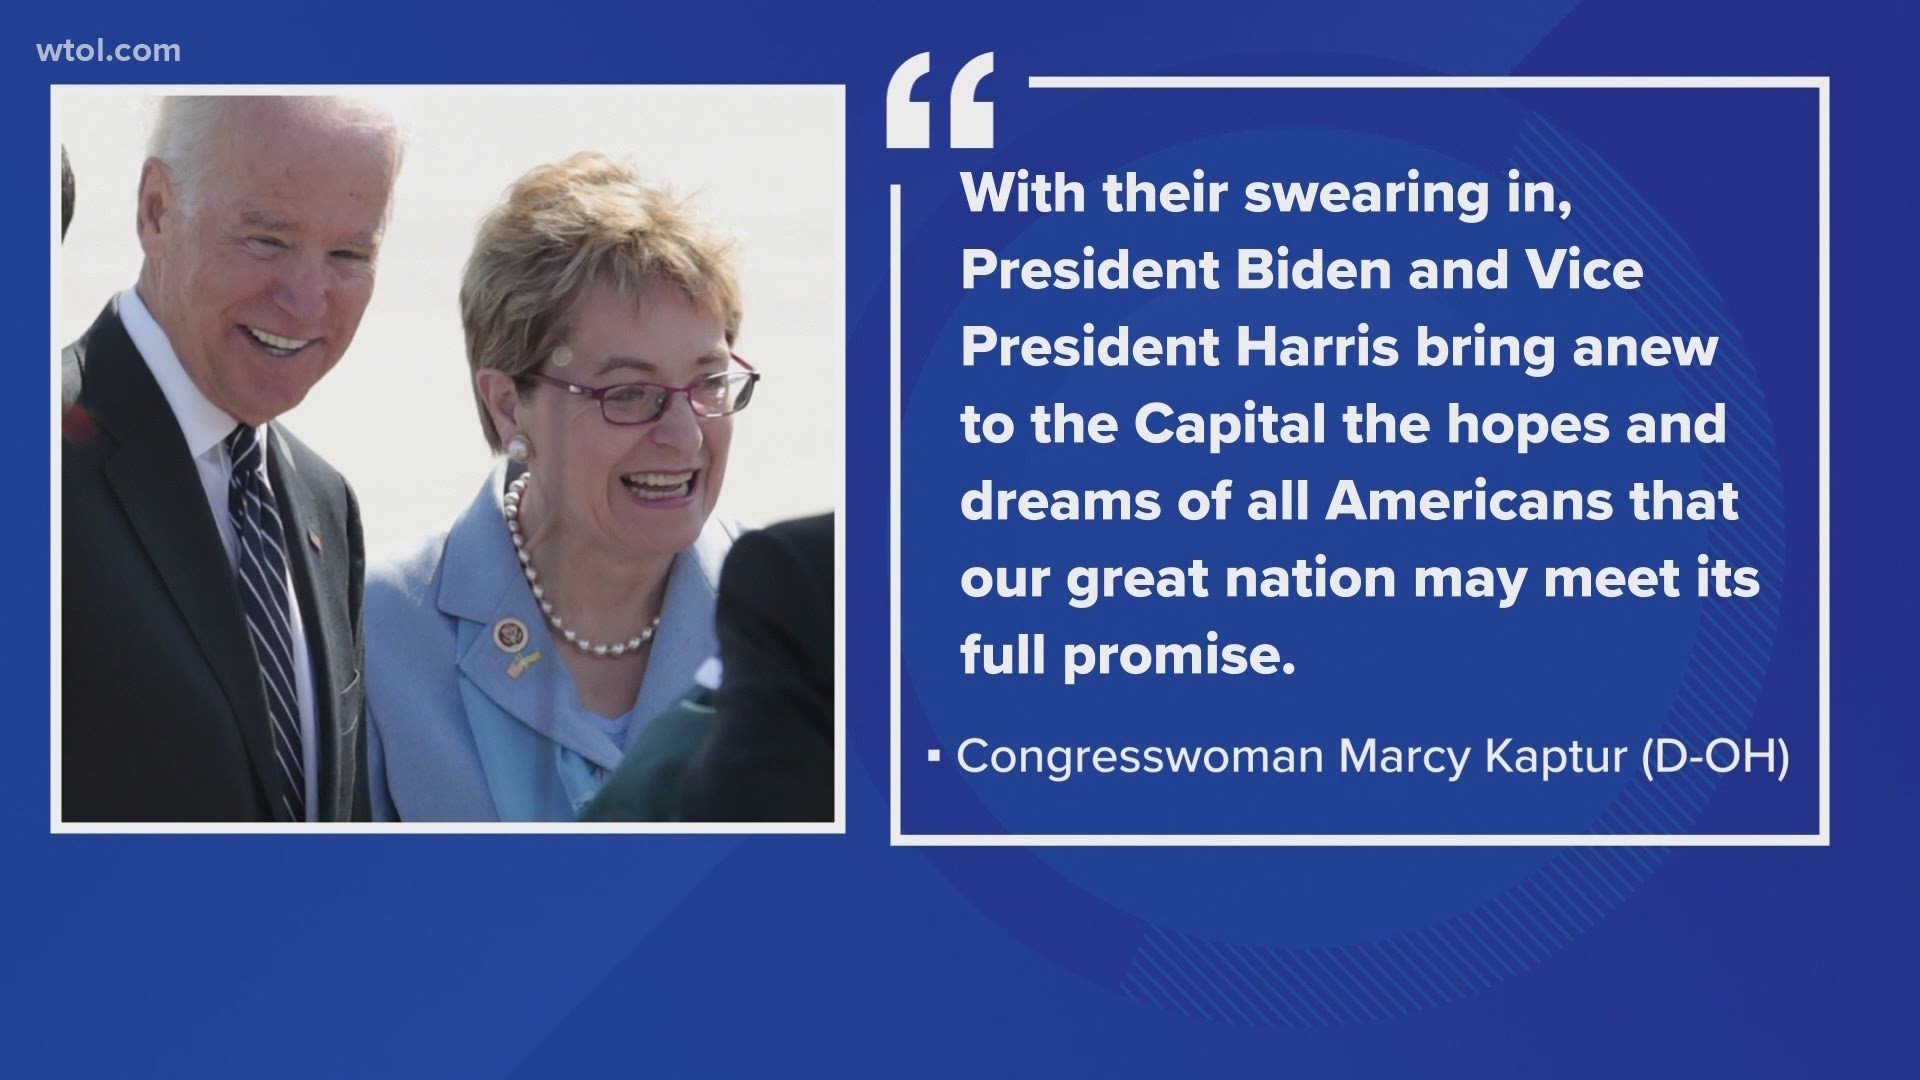 Kamala Harris is now the first woman in history to be elected and sworn in as our vice president. Across our area, political leaders praised the step forward.